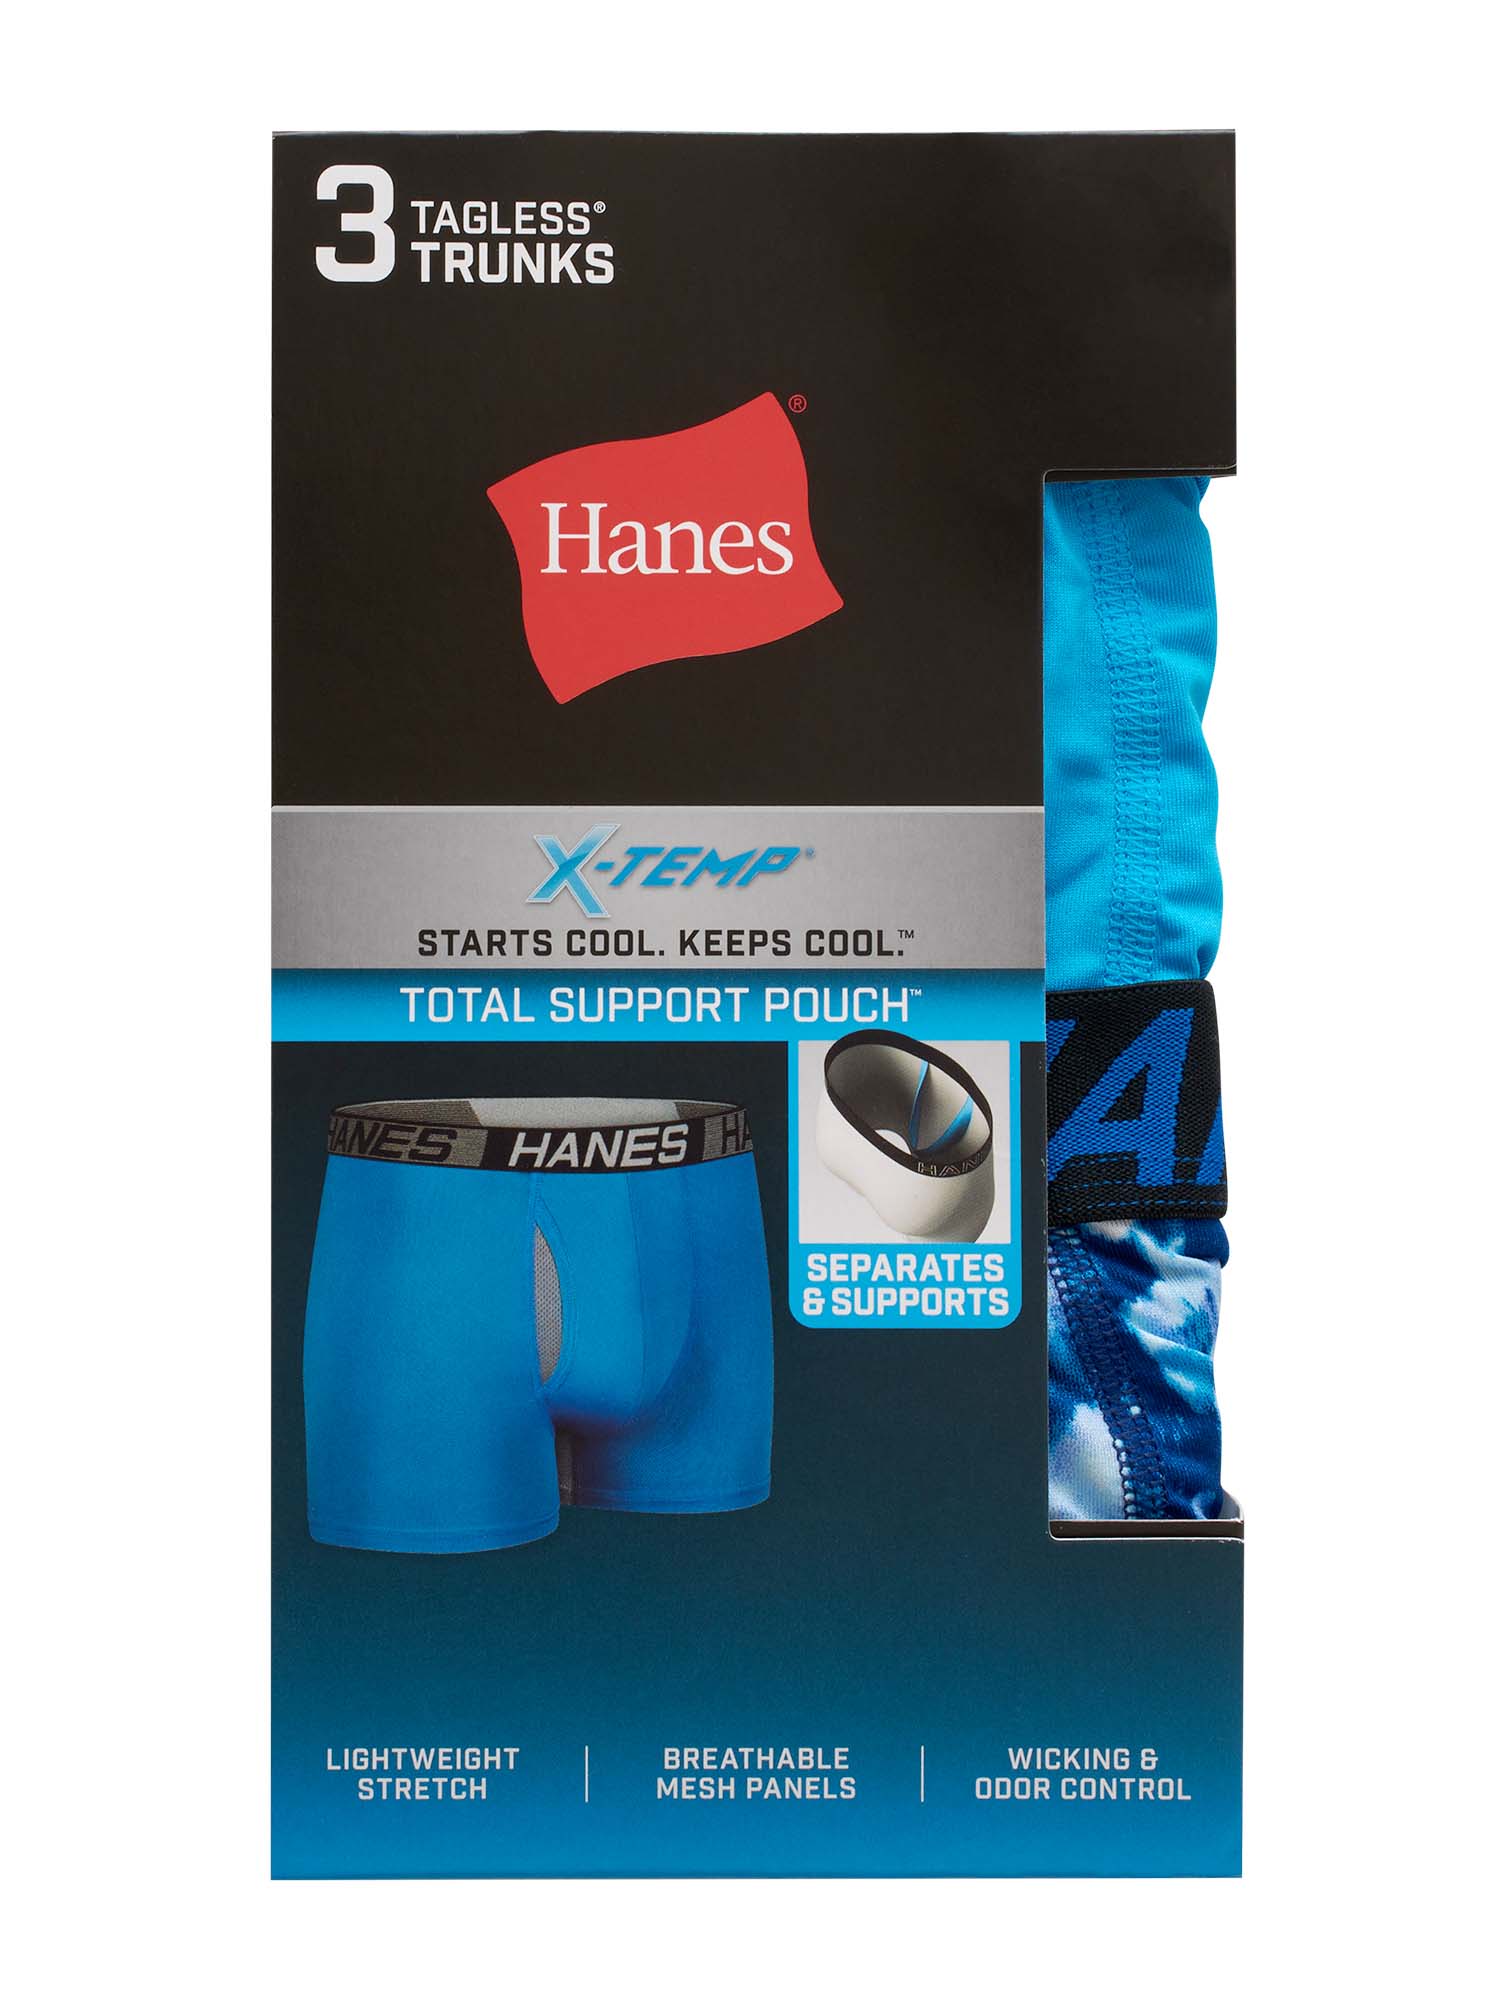 Hanes X-Temp Total Support Pouch Men's Trunks, Anti-Chafing Underwear, 3-Pack - image 3 of 10